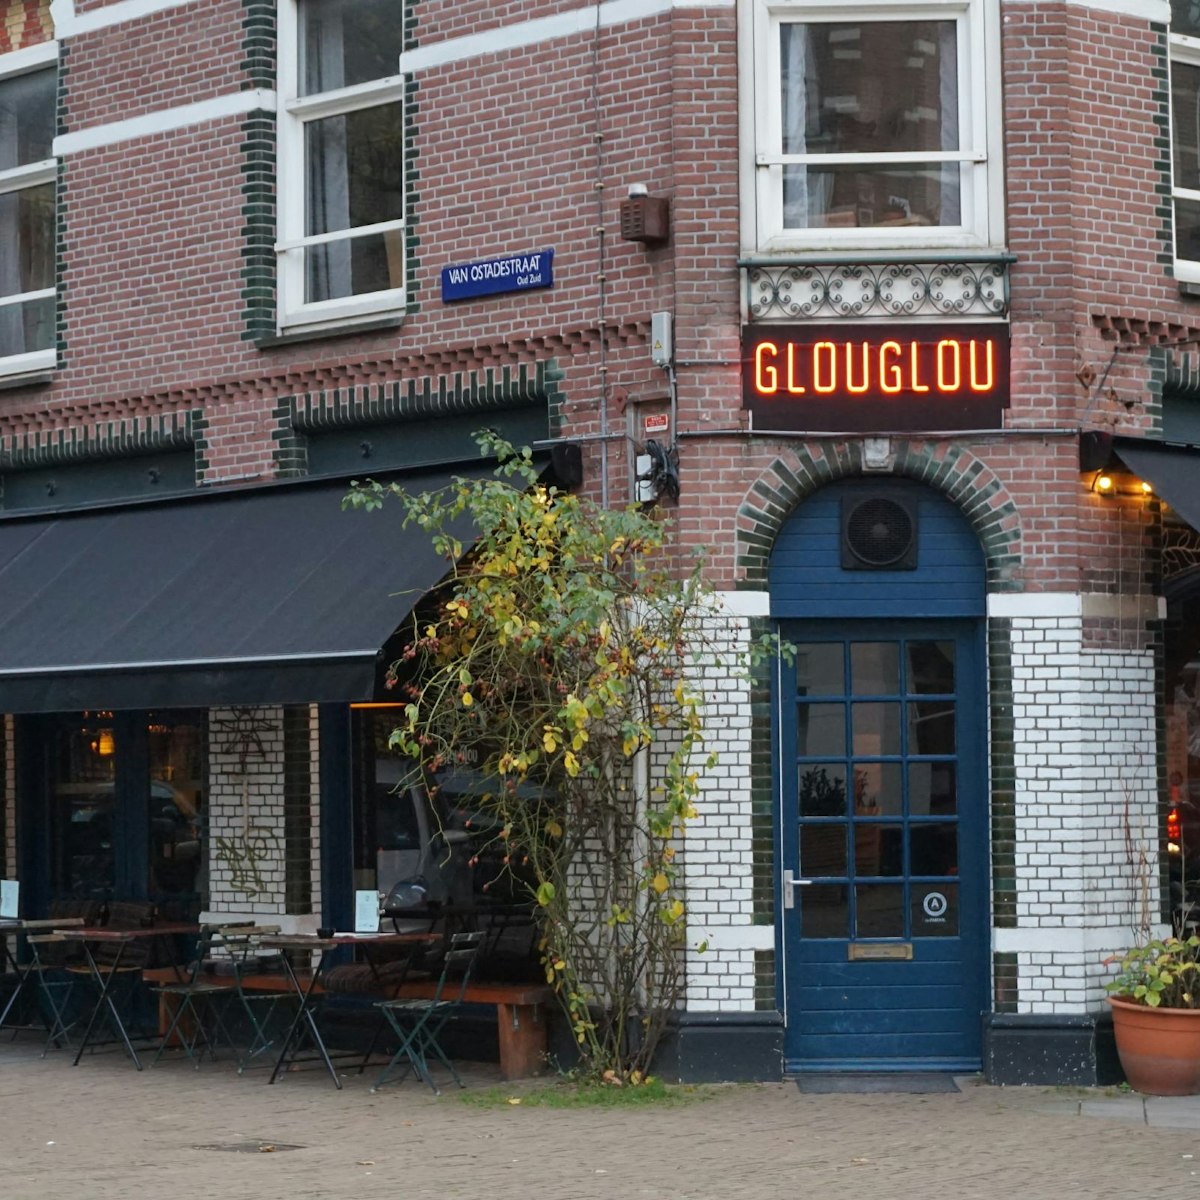 Glou Glou specialises in natural wines